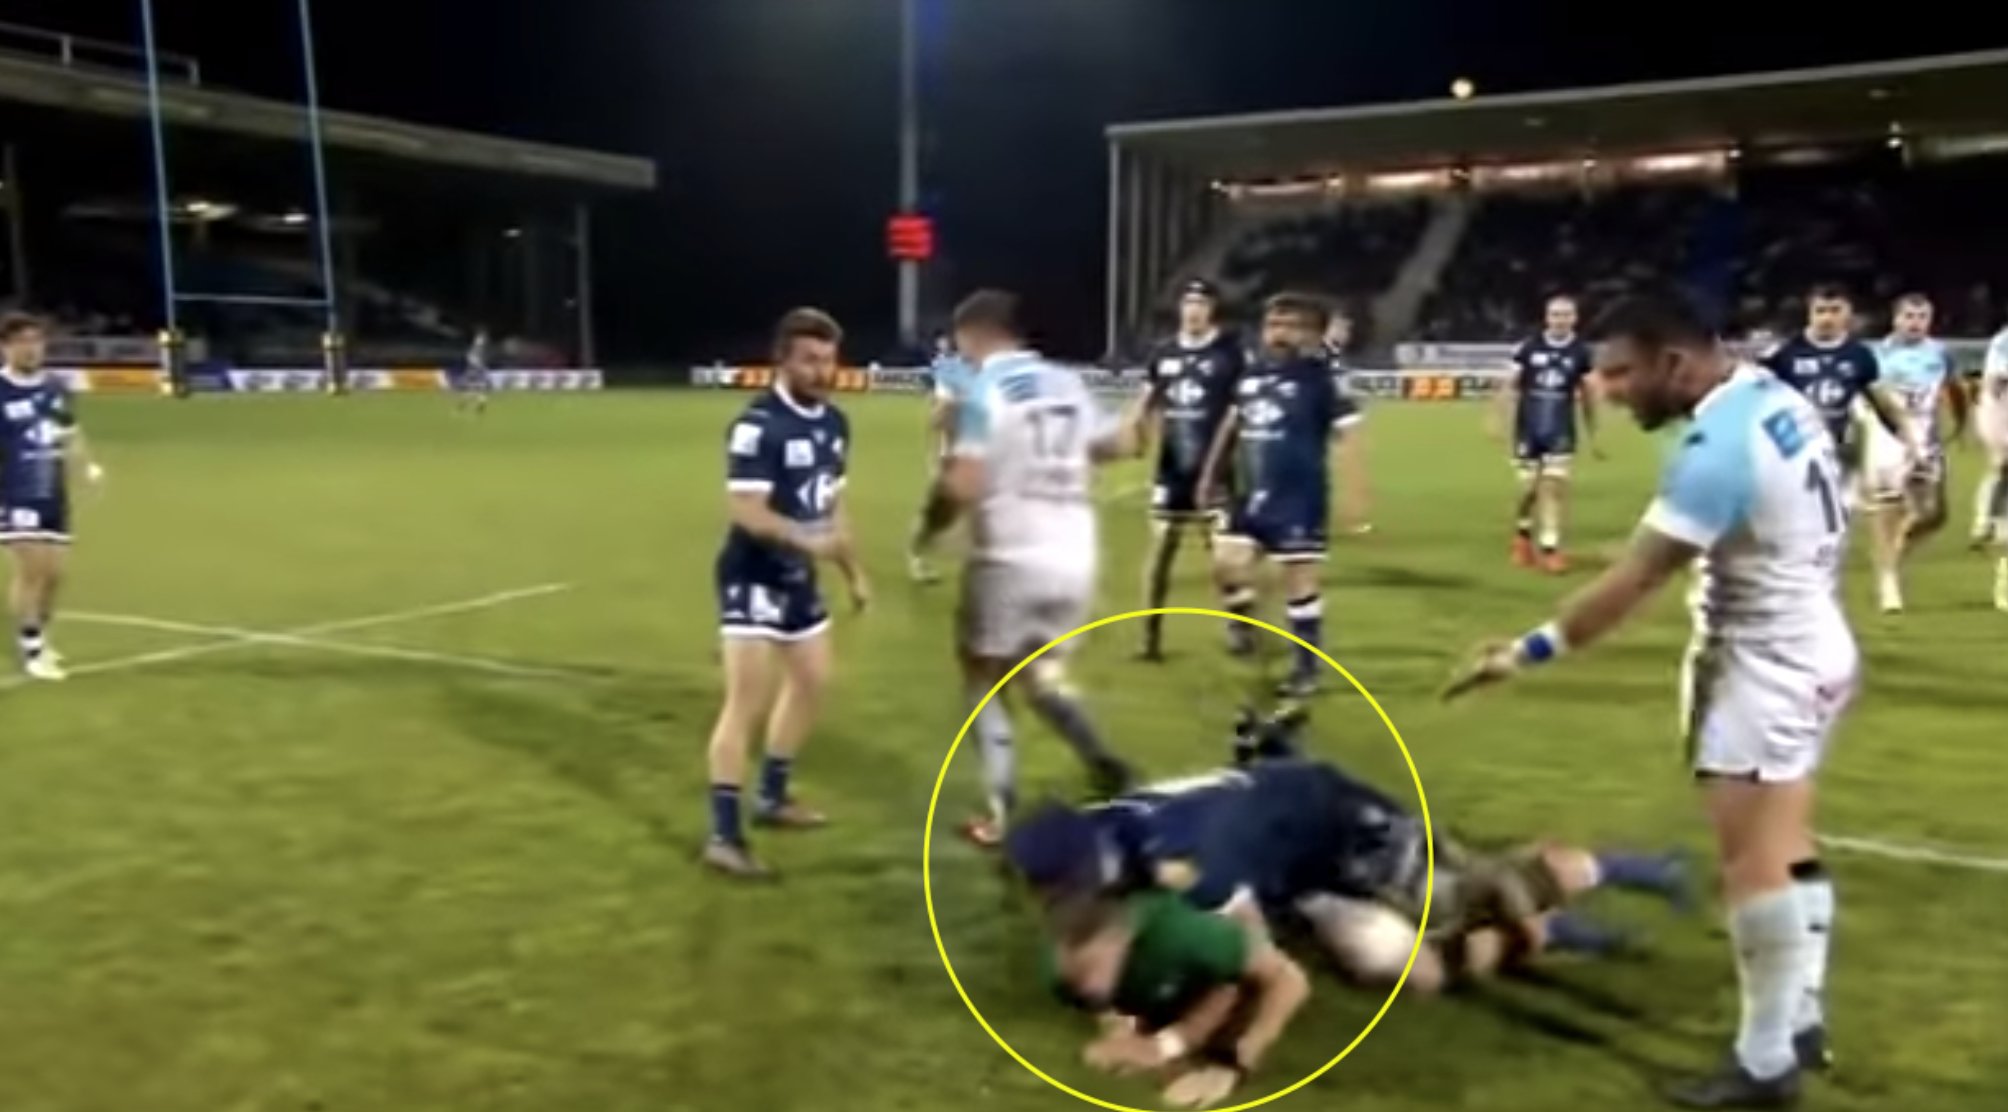 WATCH: Players and fans alike enraged as ref is brutally taken out